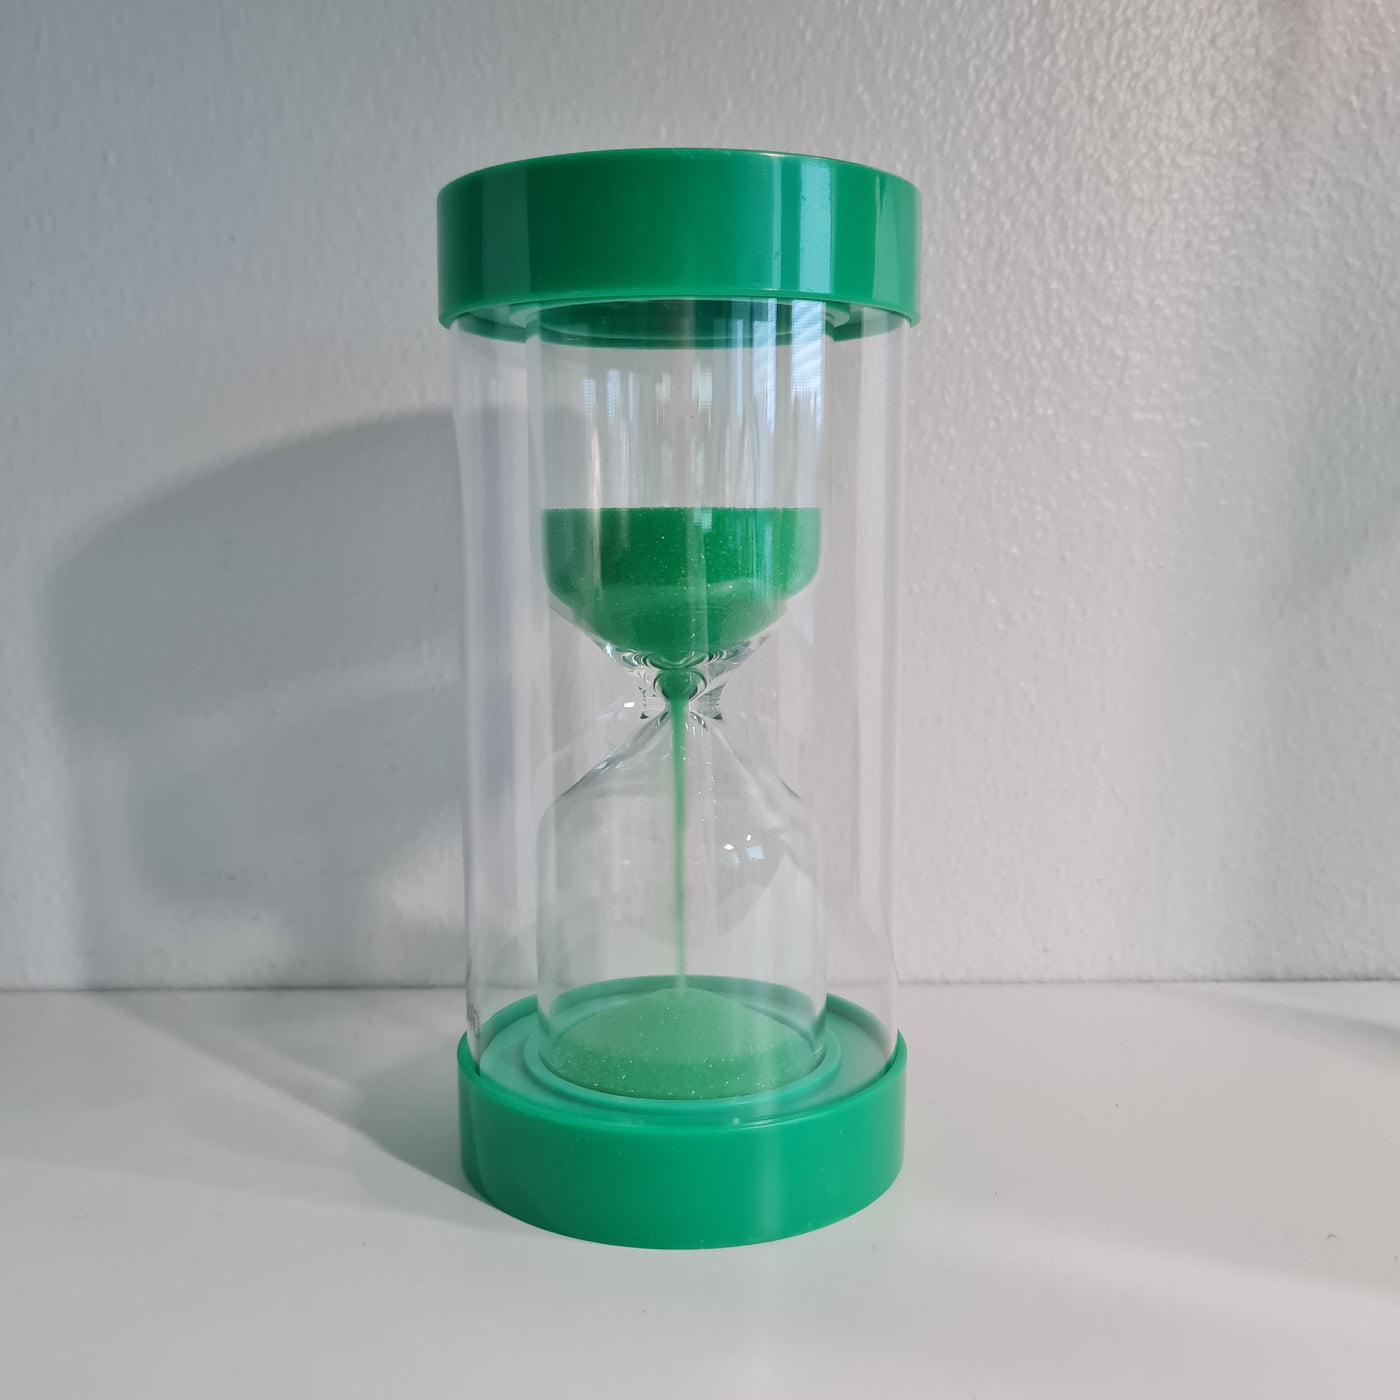 Large hourglass, 1 minutes